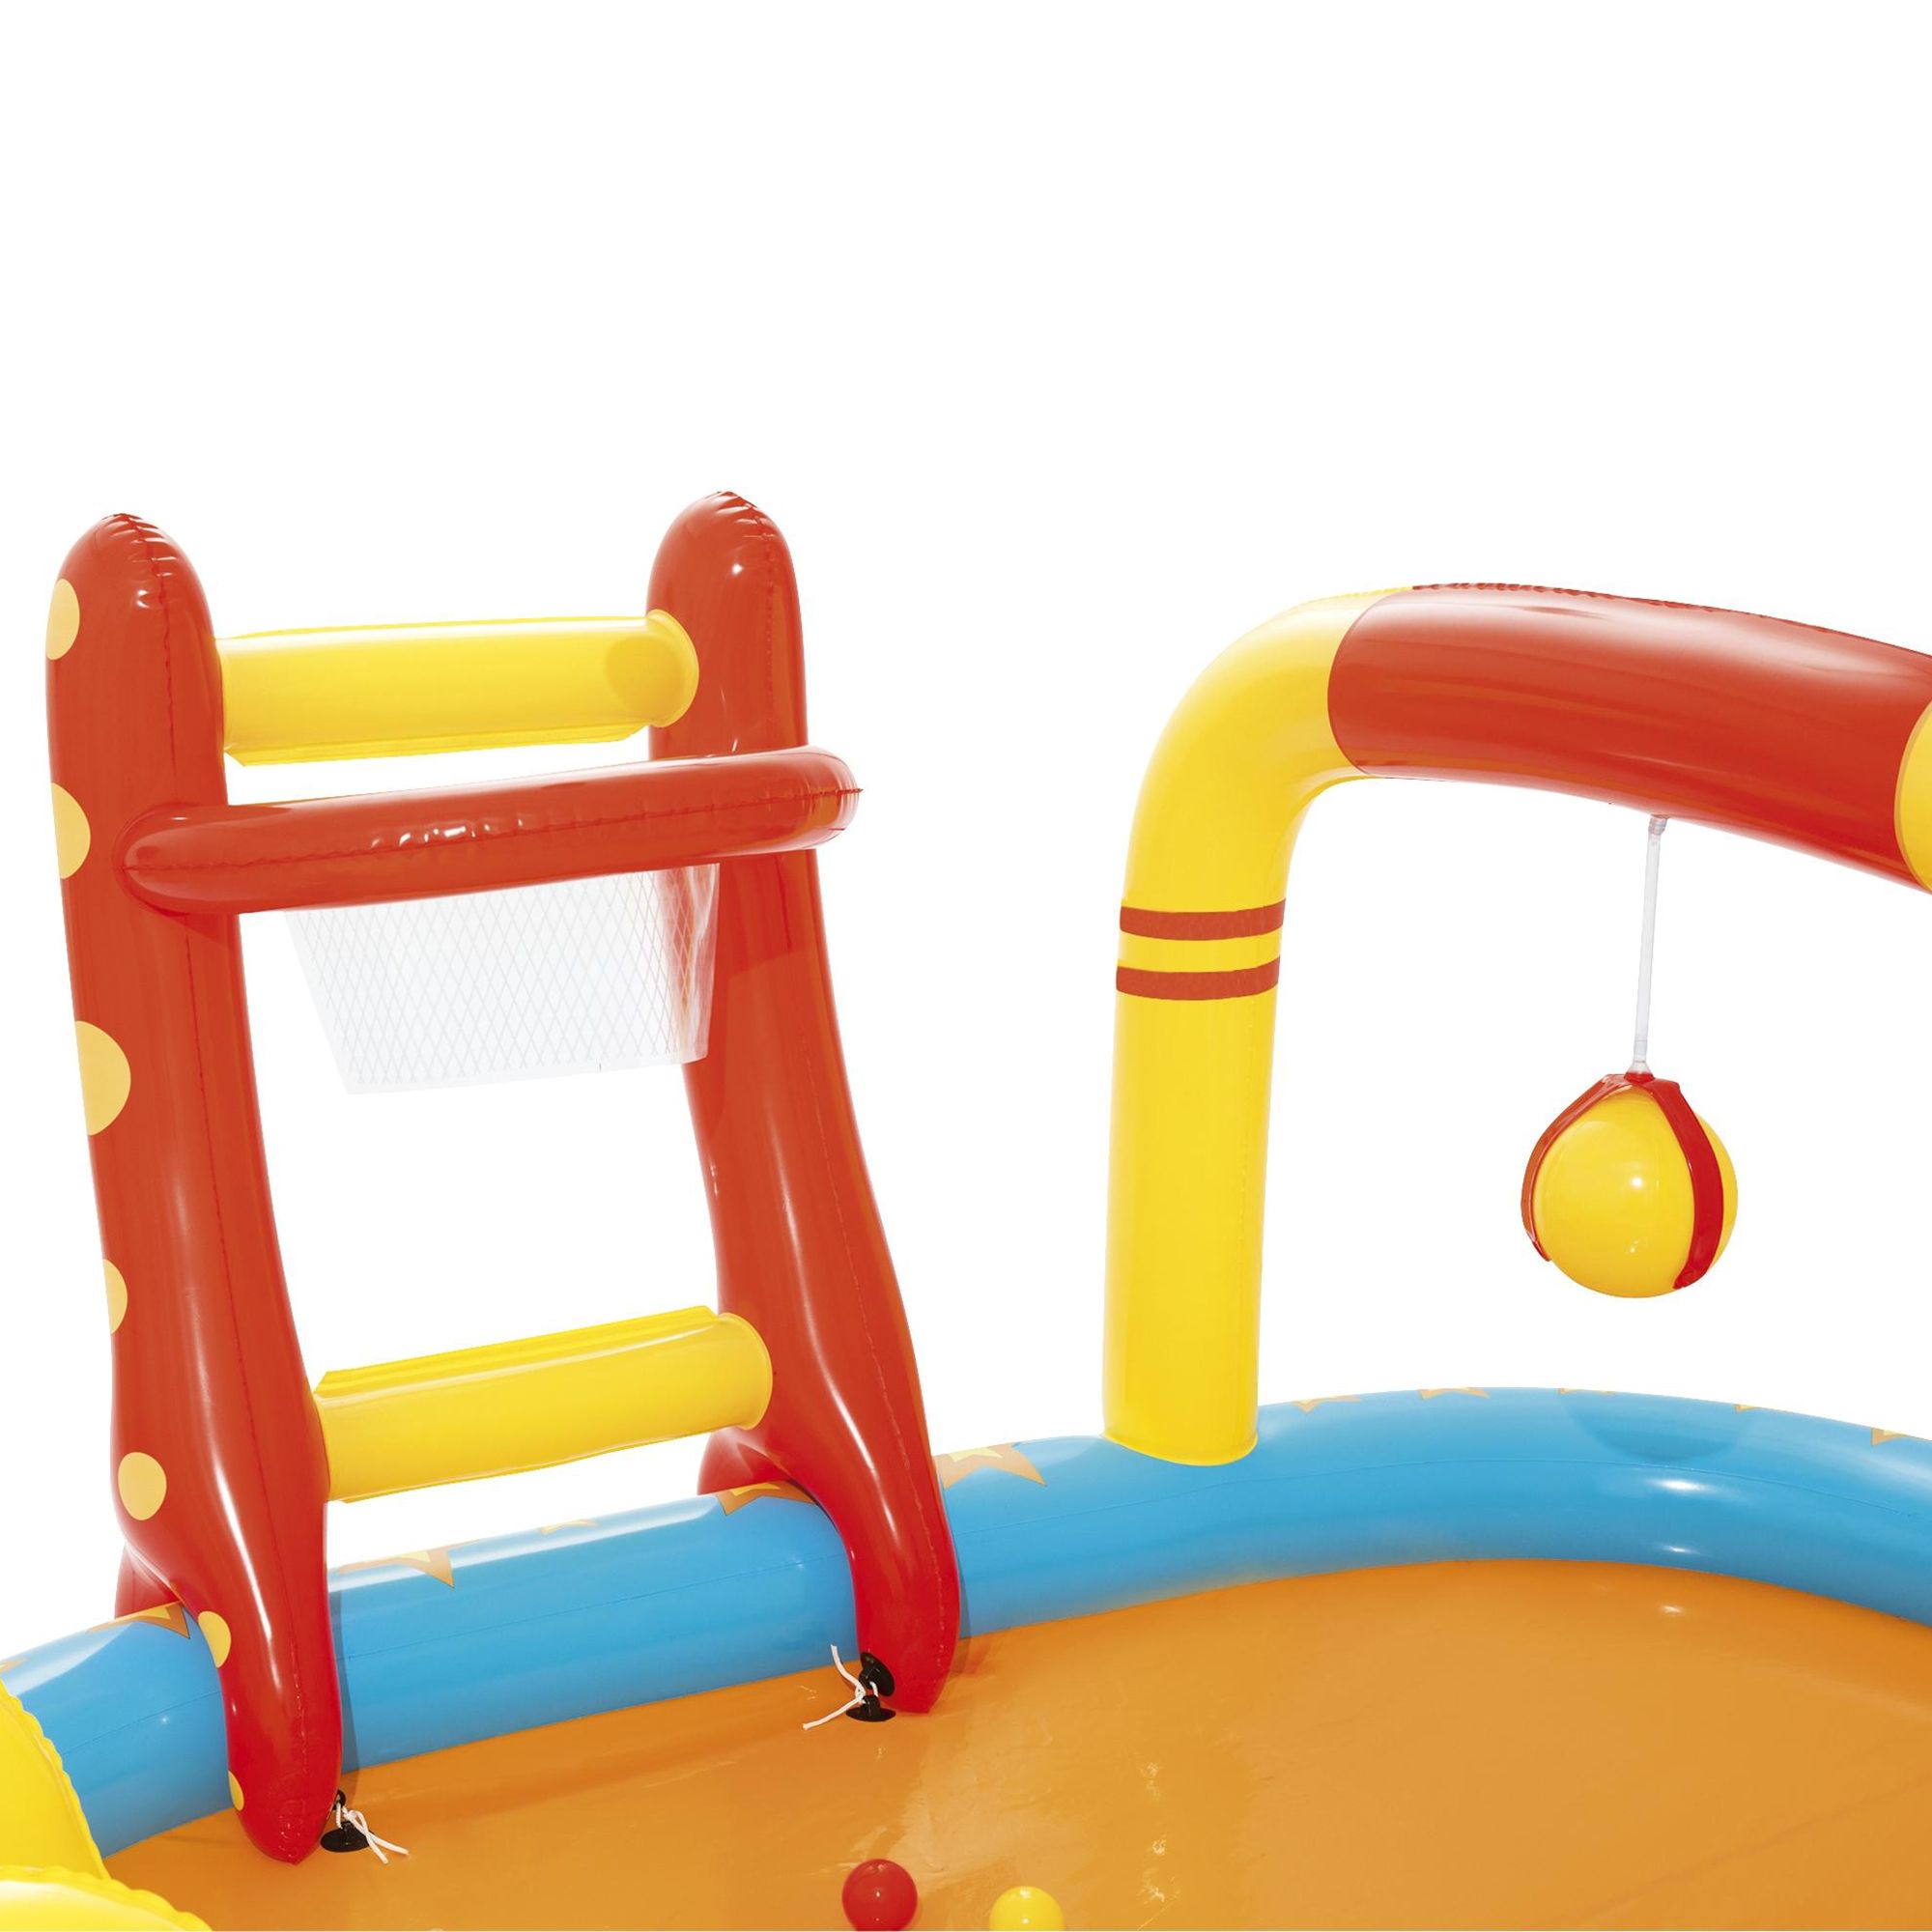 Bestway Multicolour Small Lil' champ Plastic Play centre With slide